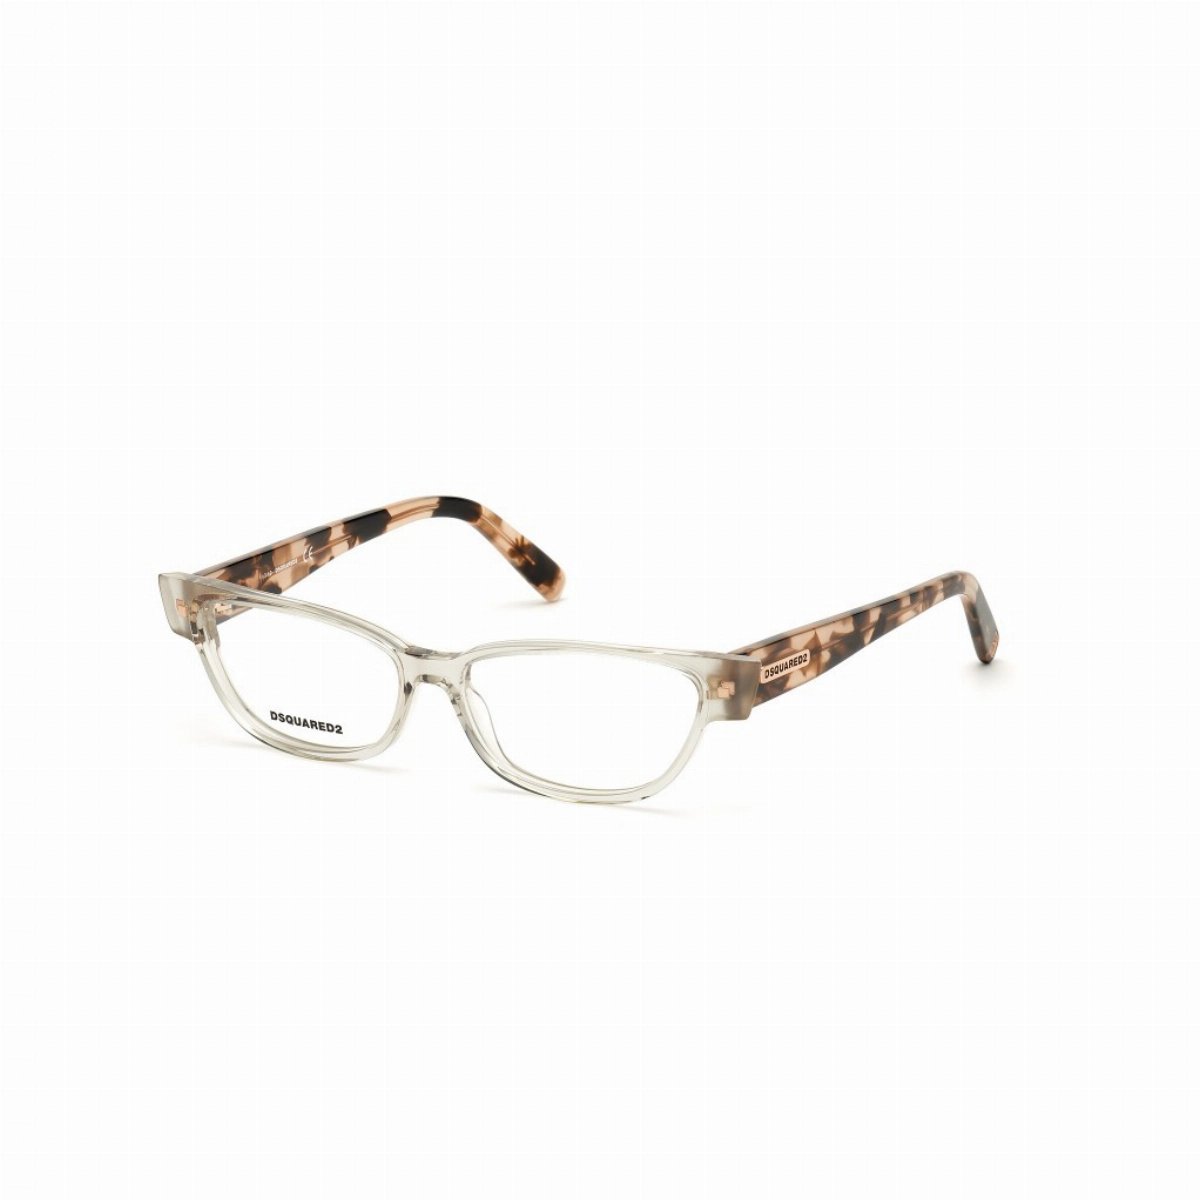 GAFAS DE MUJER DSQUARED2 DQ5300-020-55